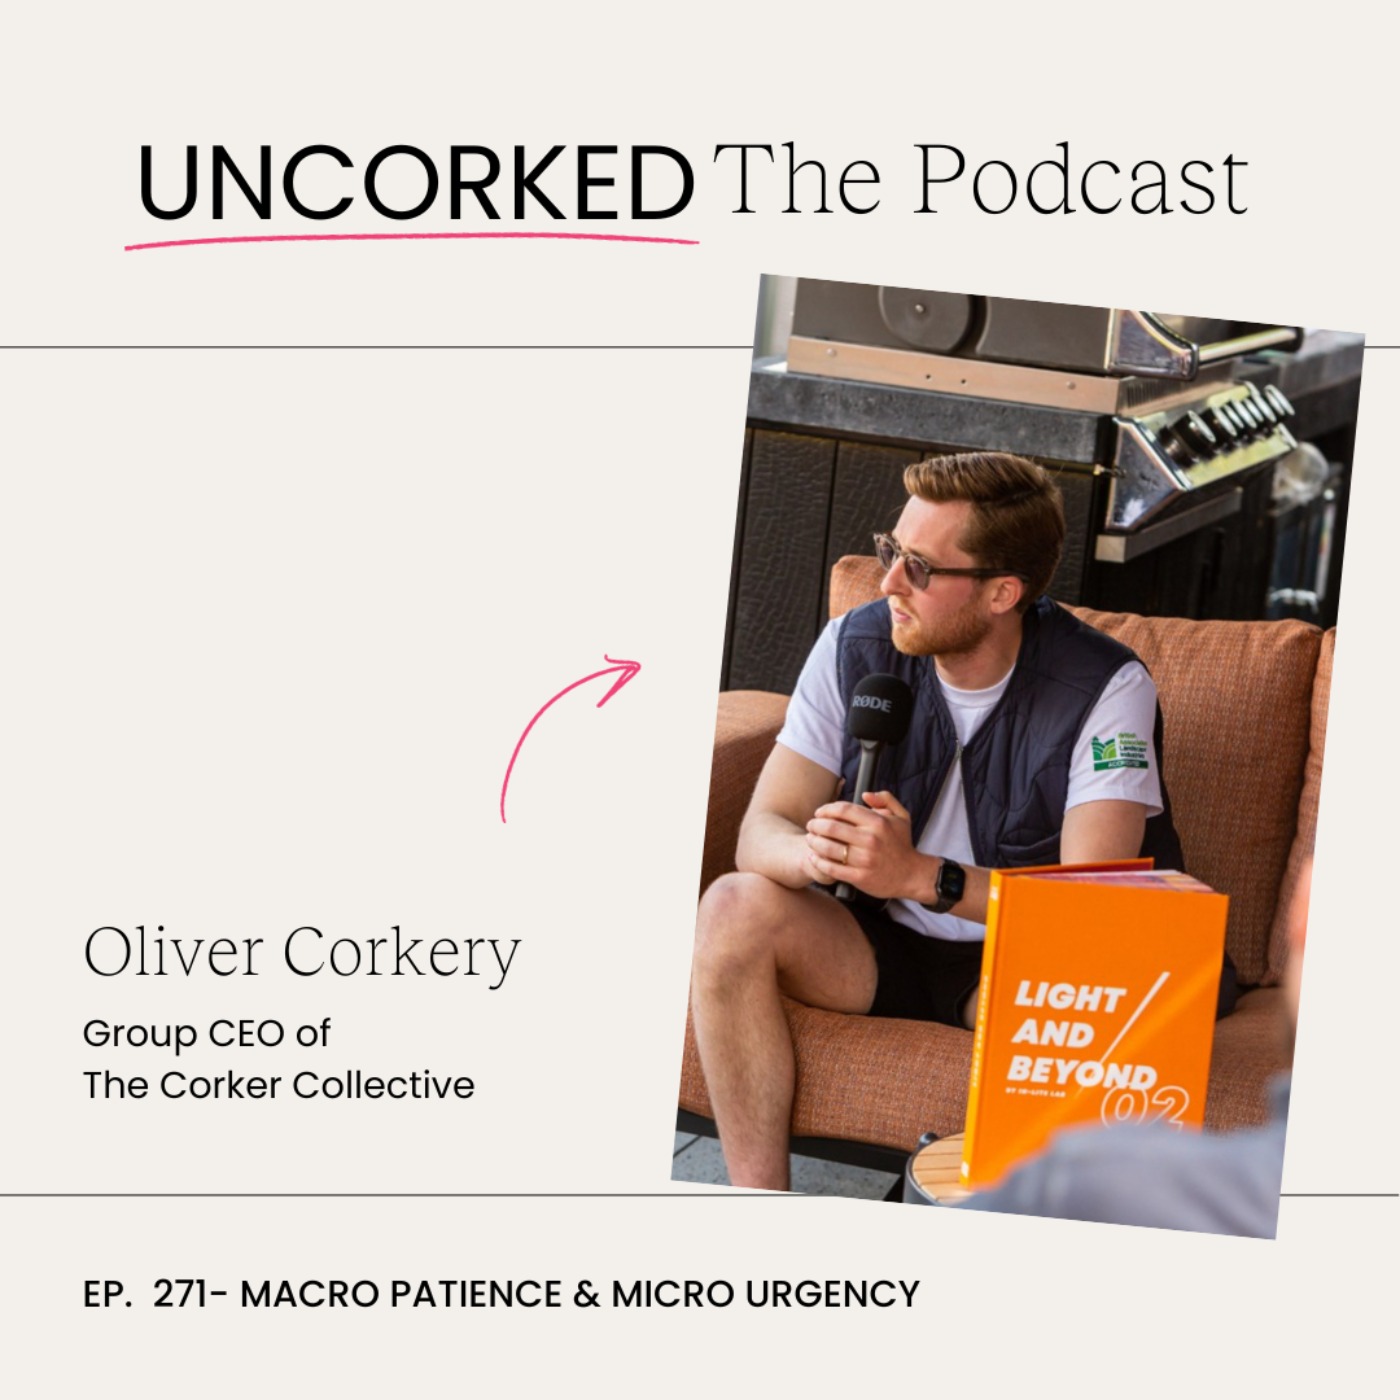 Macro Patience & Micro Urgency with Oliver Corkery